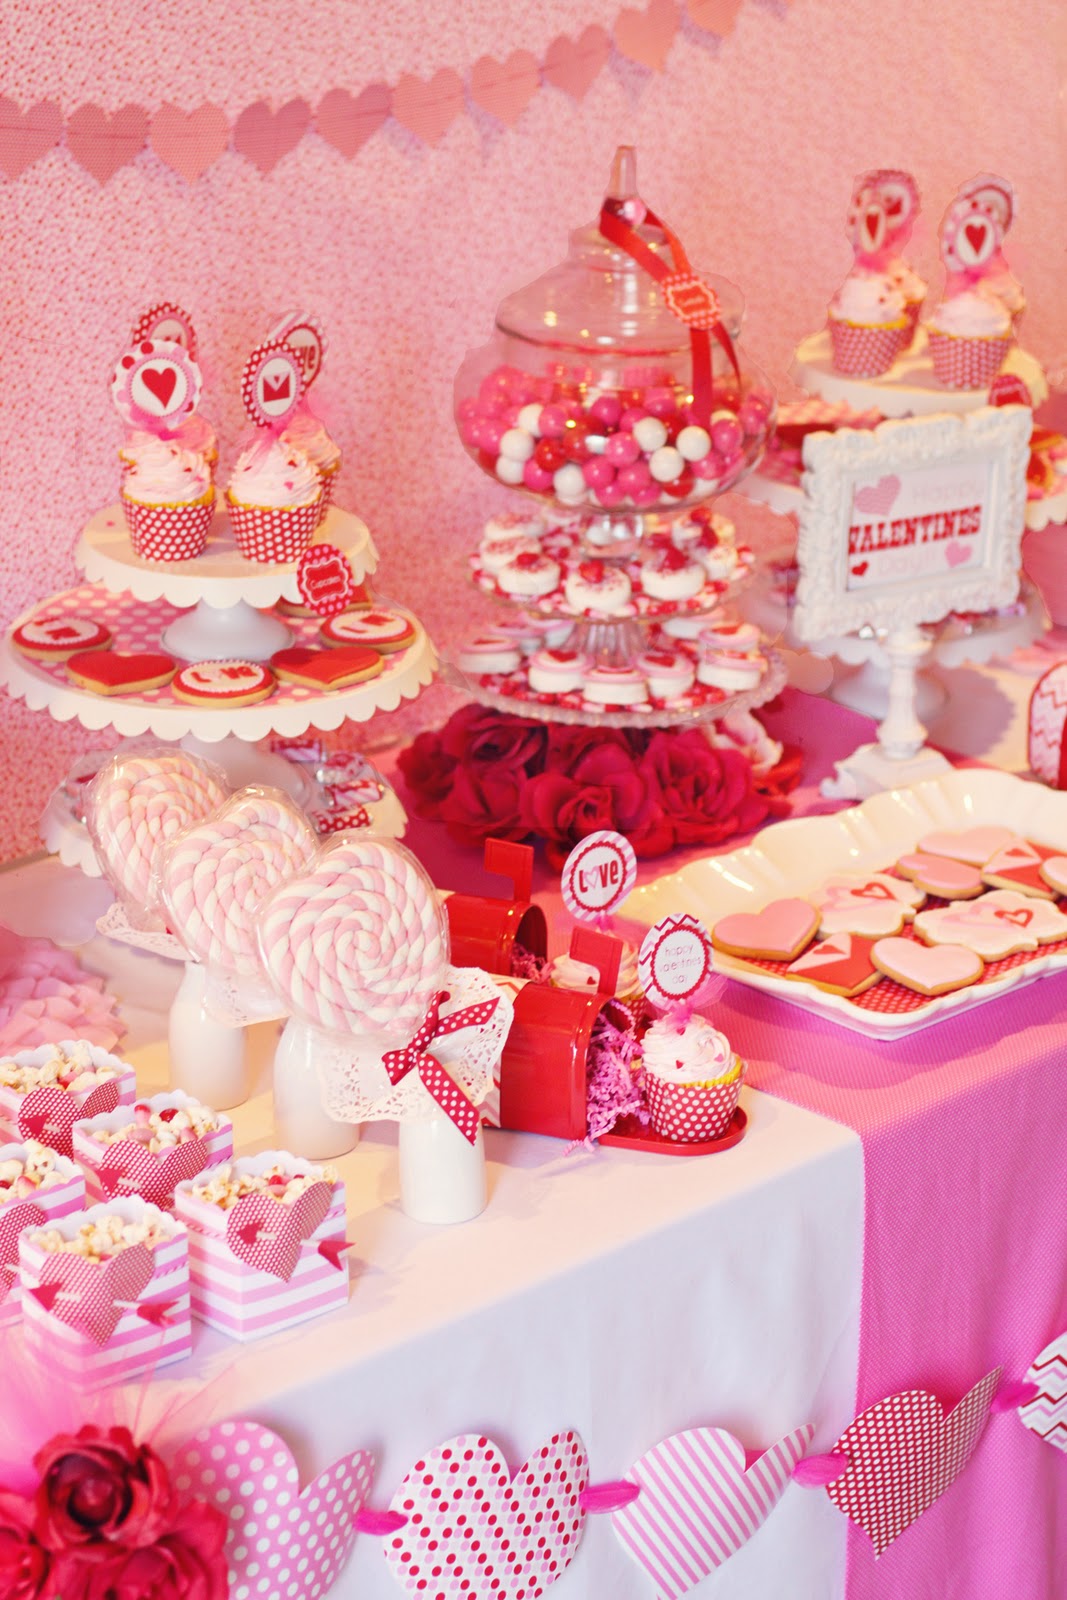 Amanda's Parties To Go Valentines Party Table Ideas